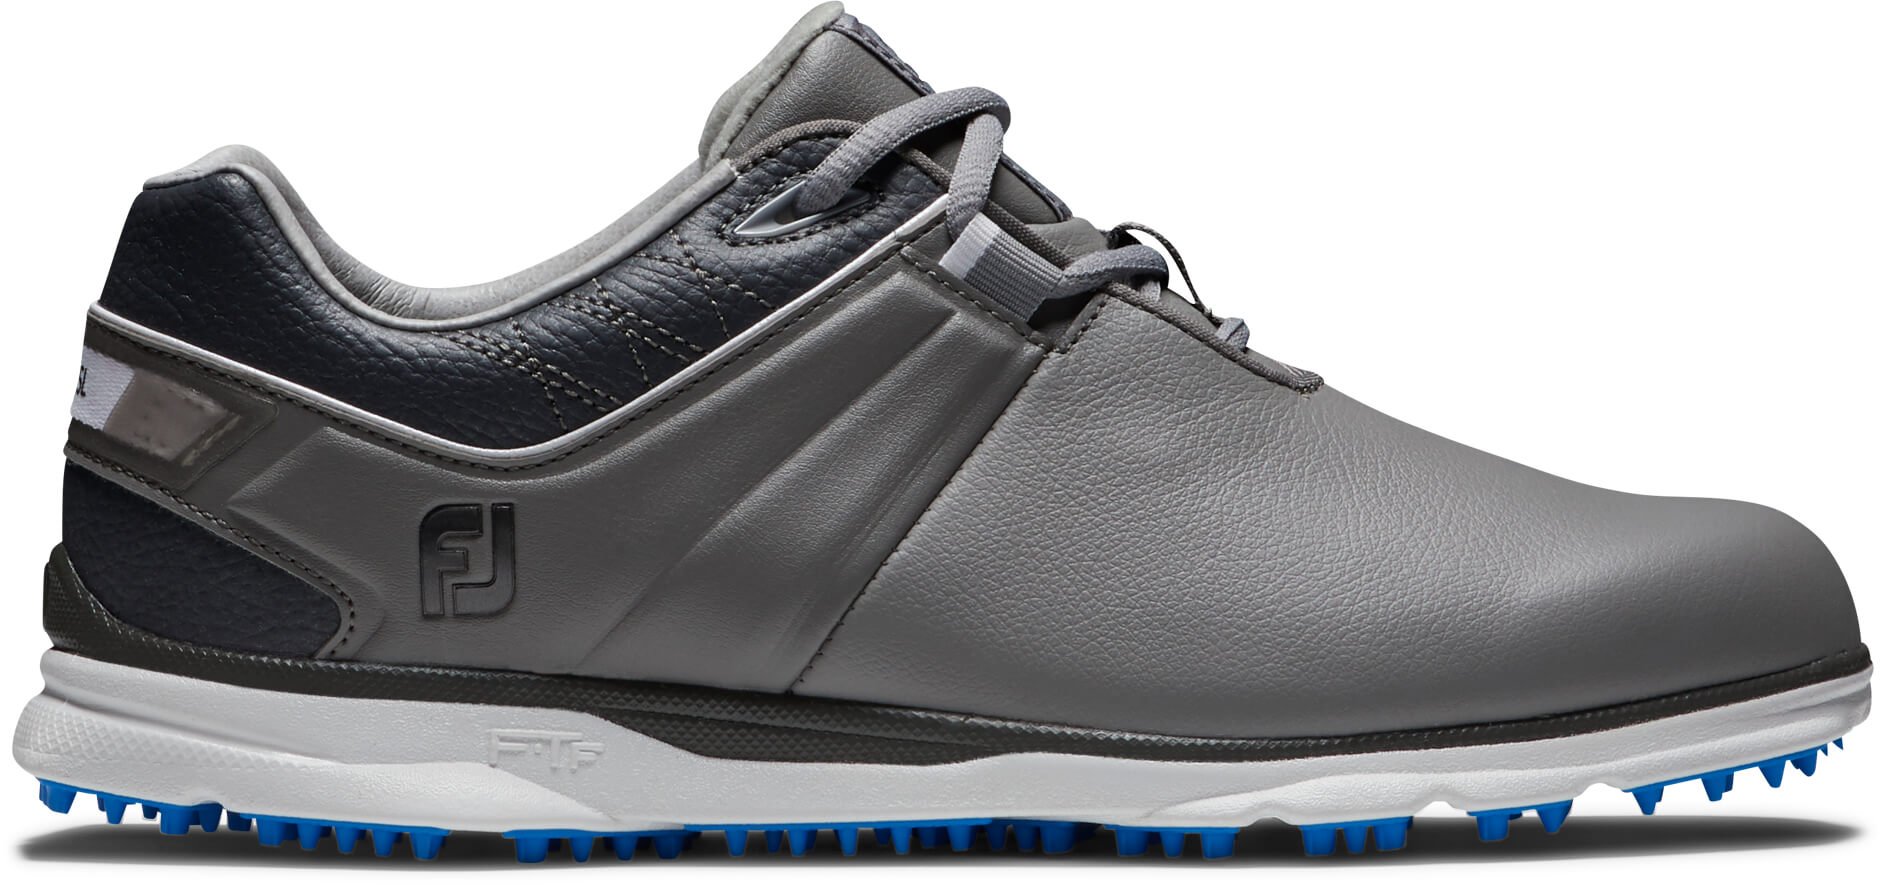 Save 29% on Footjoy Women's Pro/sl Golf Shoes 2023 In Grey/charcoal/reef Blue, Size 5, Medium